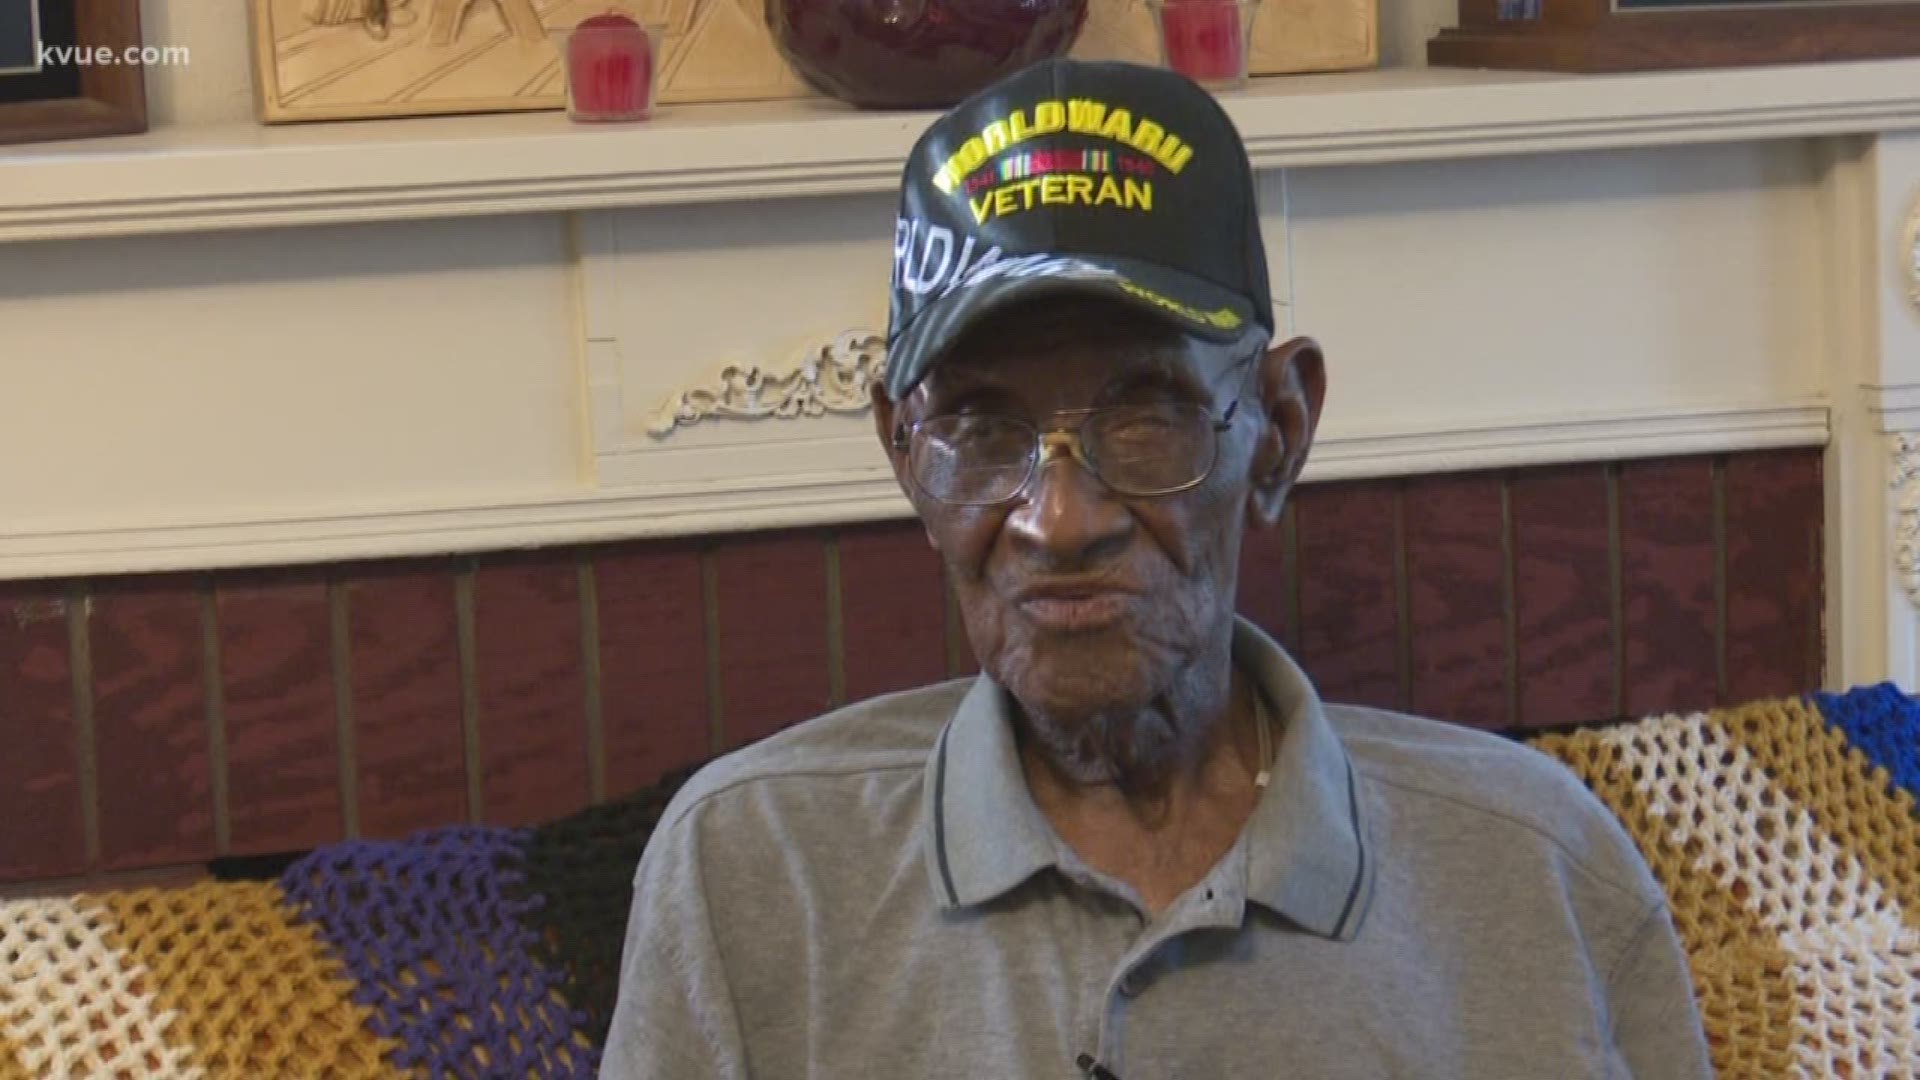 Thanksgiving means something different to everybody. For many, it's a time to give thanks to veterans who have defended our freedoms and rights. Vets like Richard Overton, the 111-year old Austinite who's had a year to remember. 